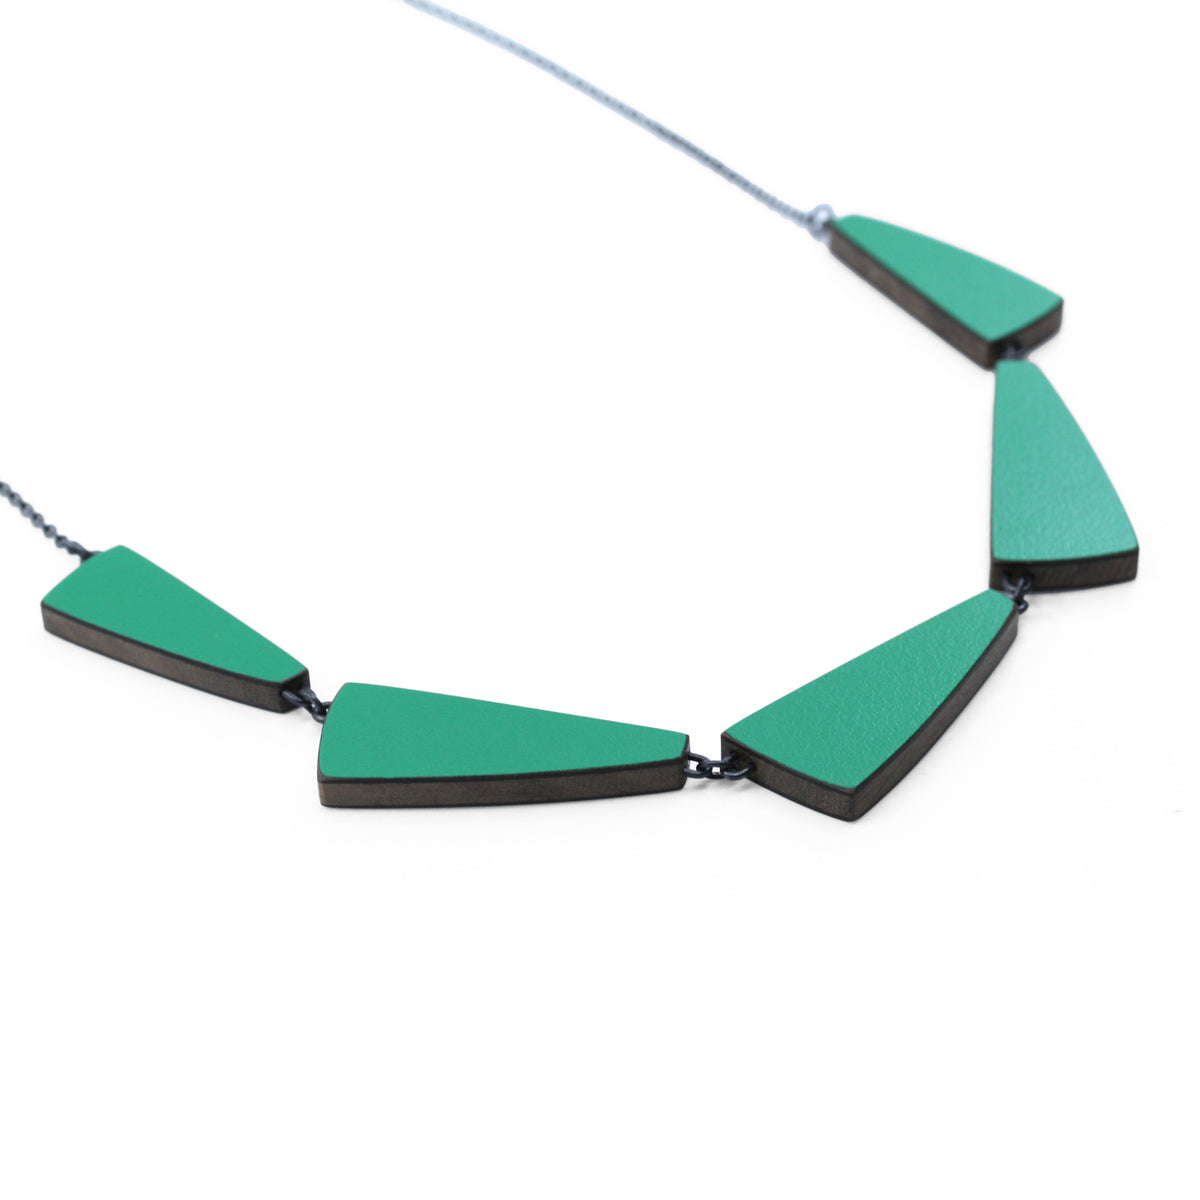 Five part wing necklace (reversible) - grass green and blue